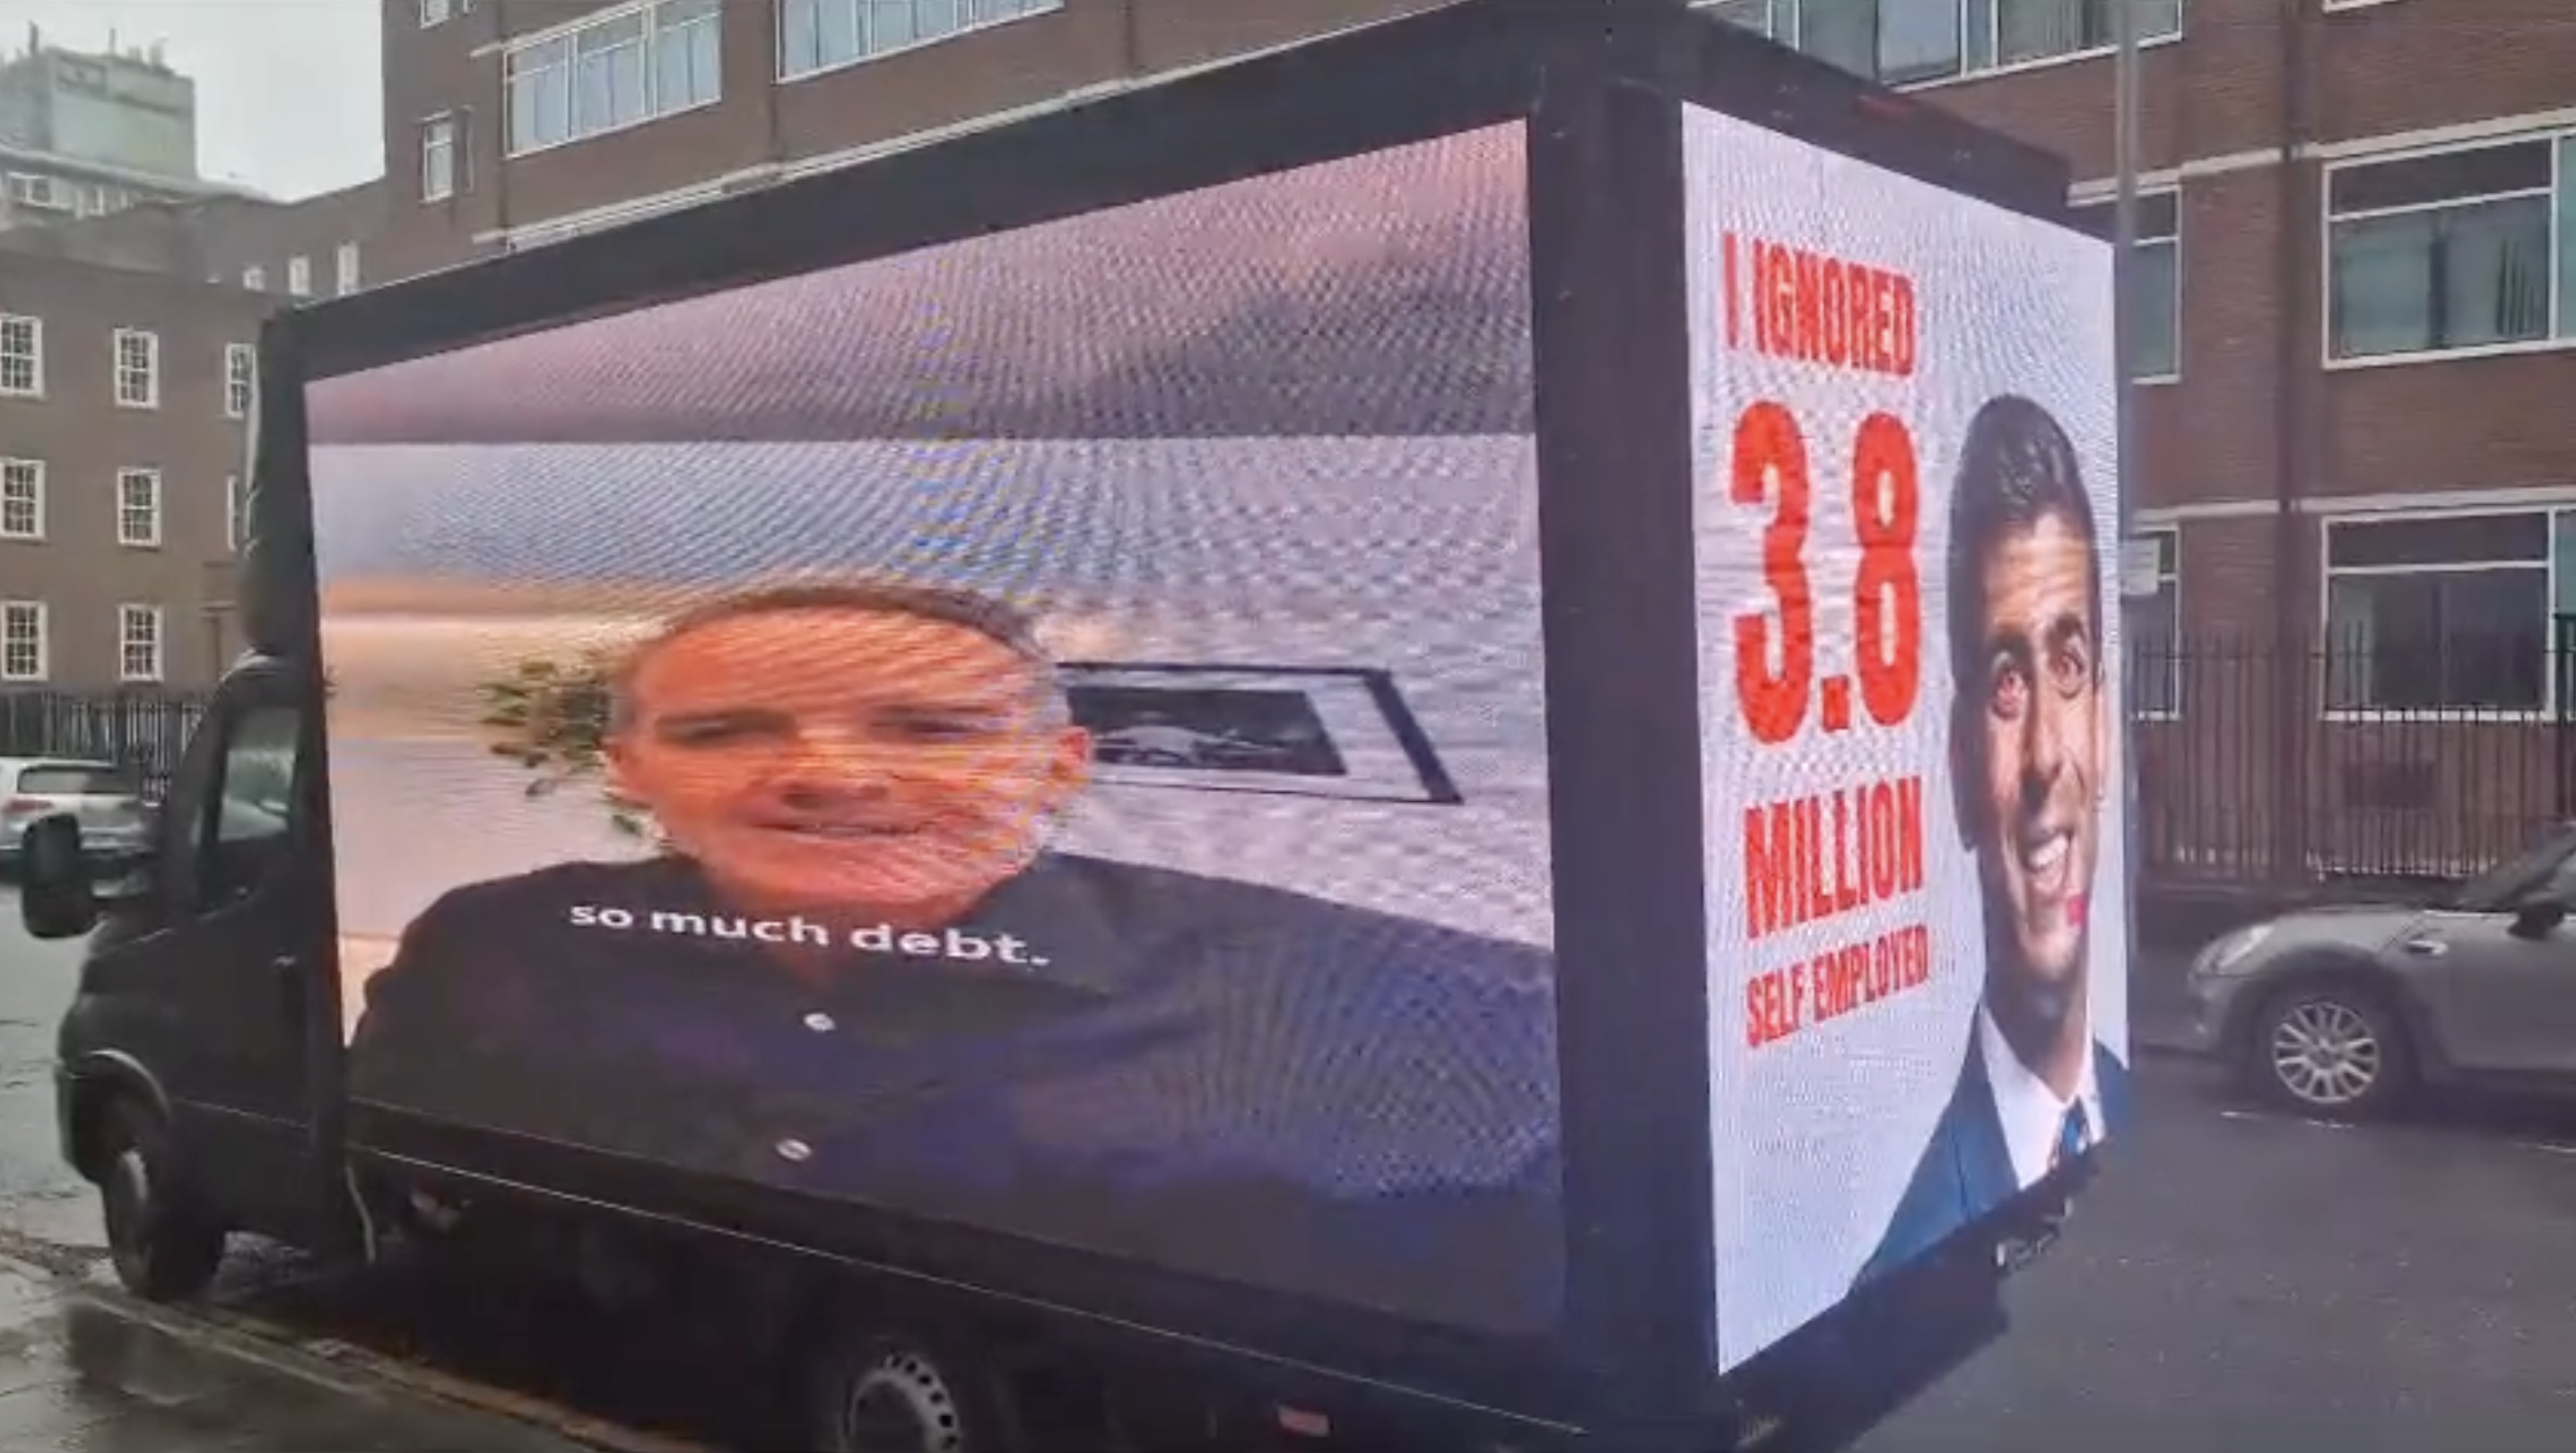 Digital trucks driving loops around the Tory Conference also show the adverts